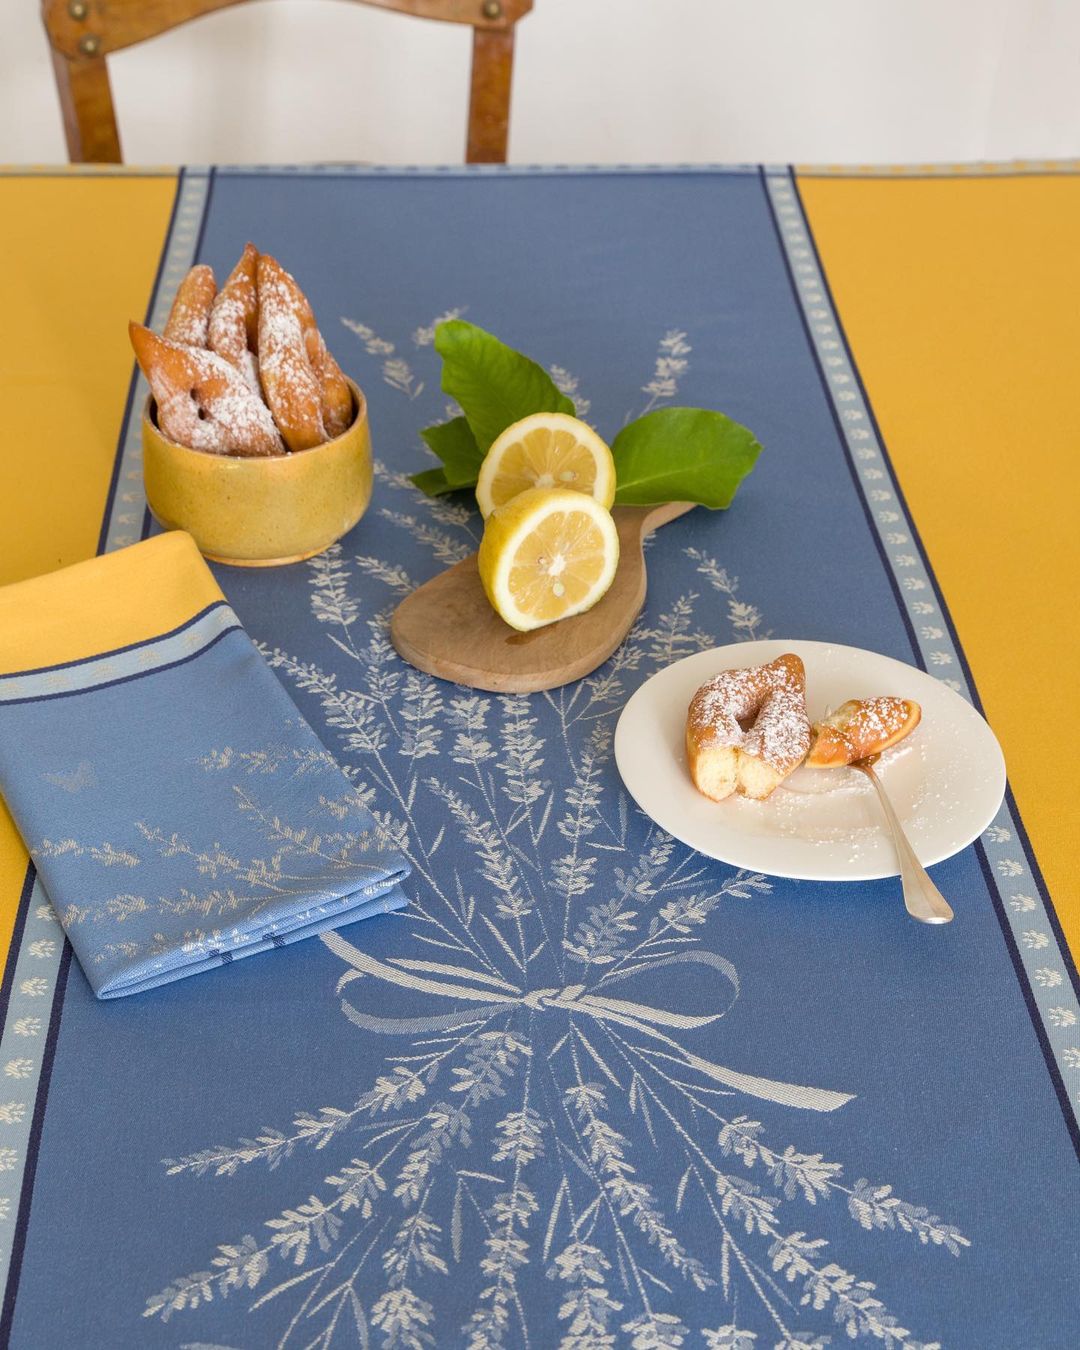 Tissus Toselli Grignan Yellow/Blue Tablecloth